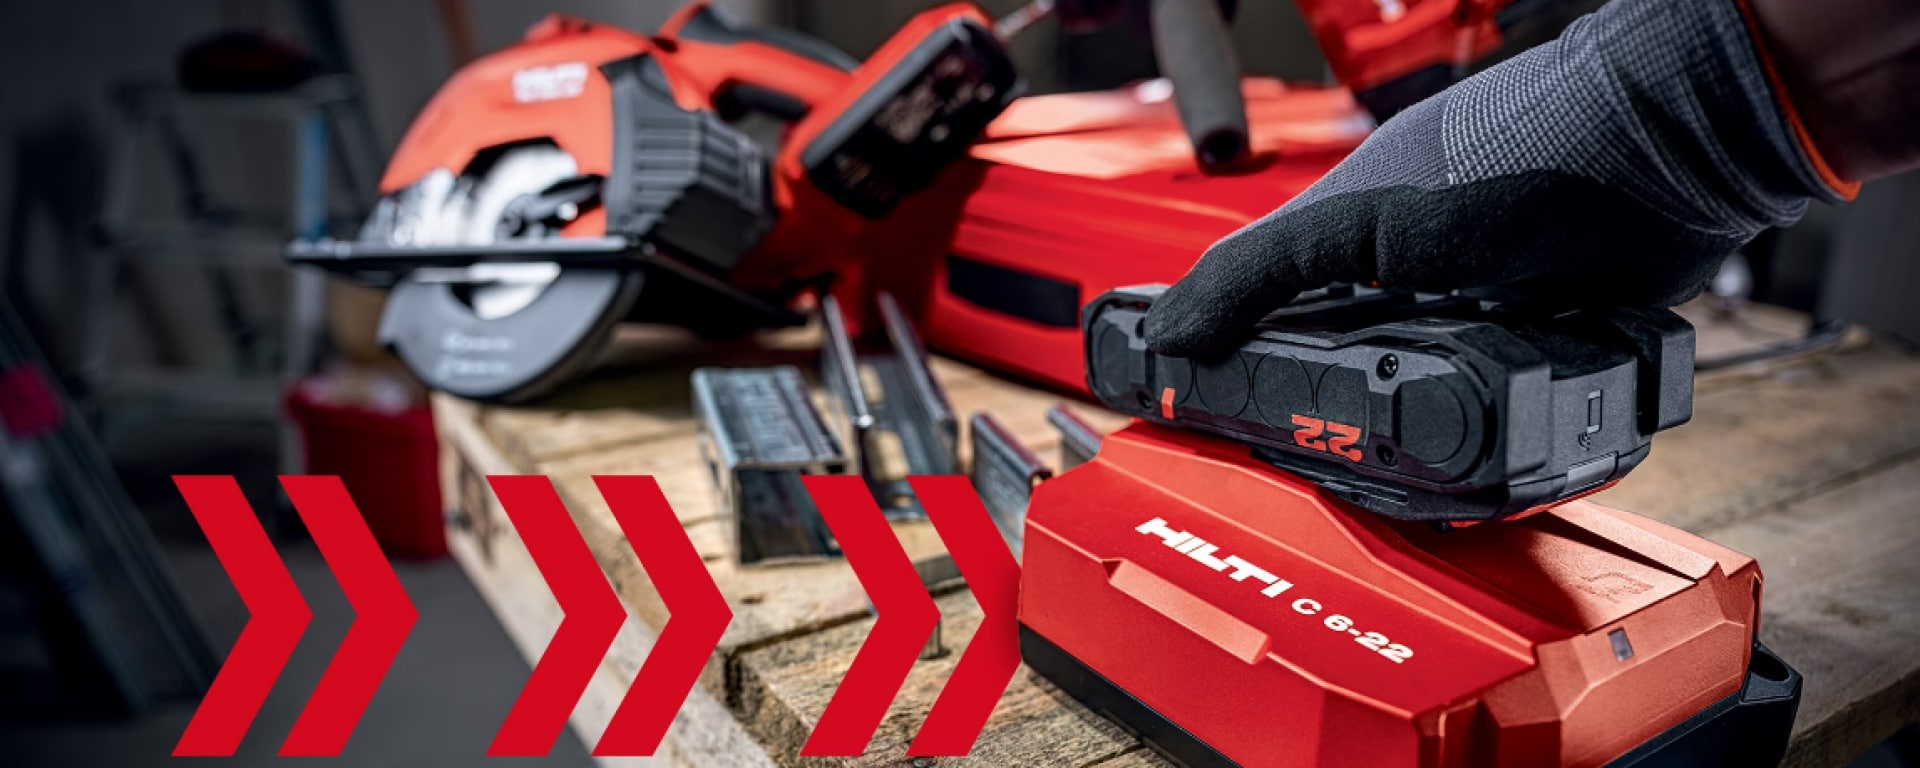 All-new 22V cordless platform is now launched